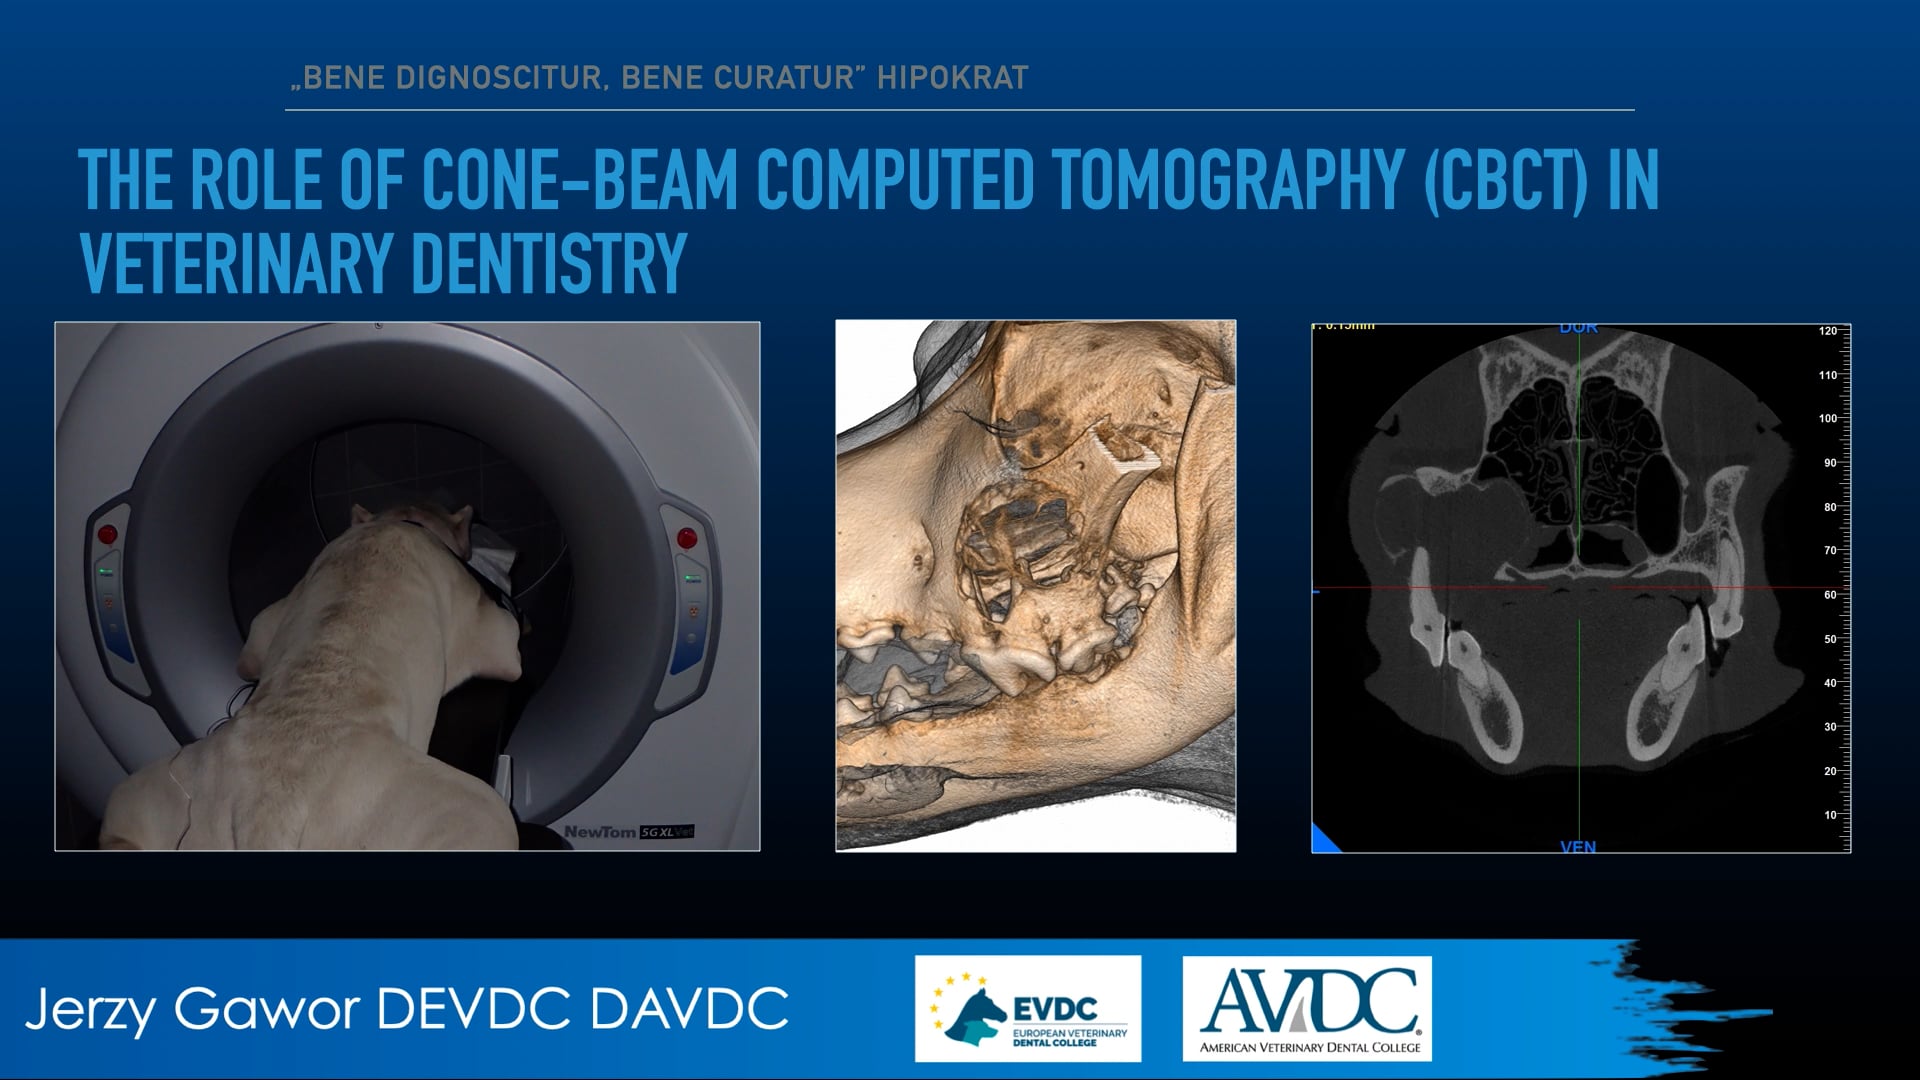 The role of cone-beam computed tomography (CBCT) in veterinary dentistry